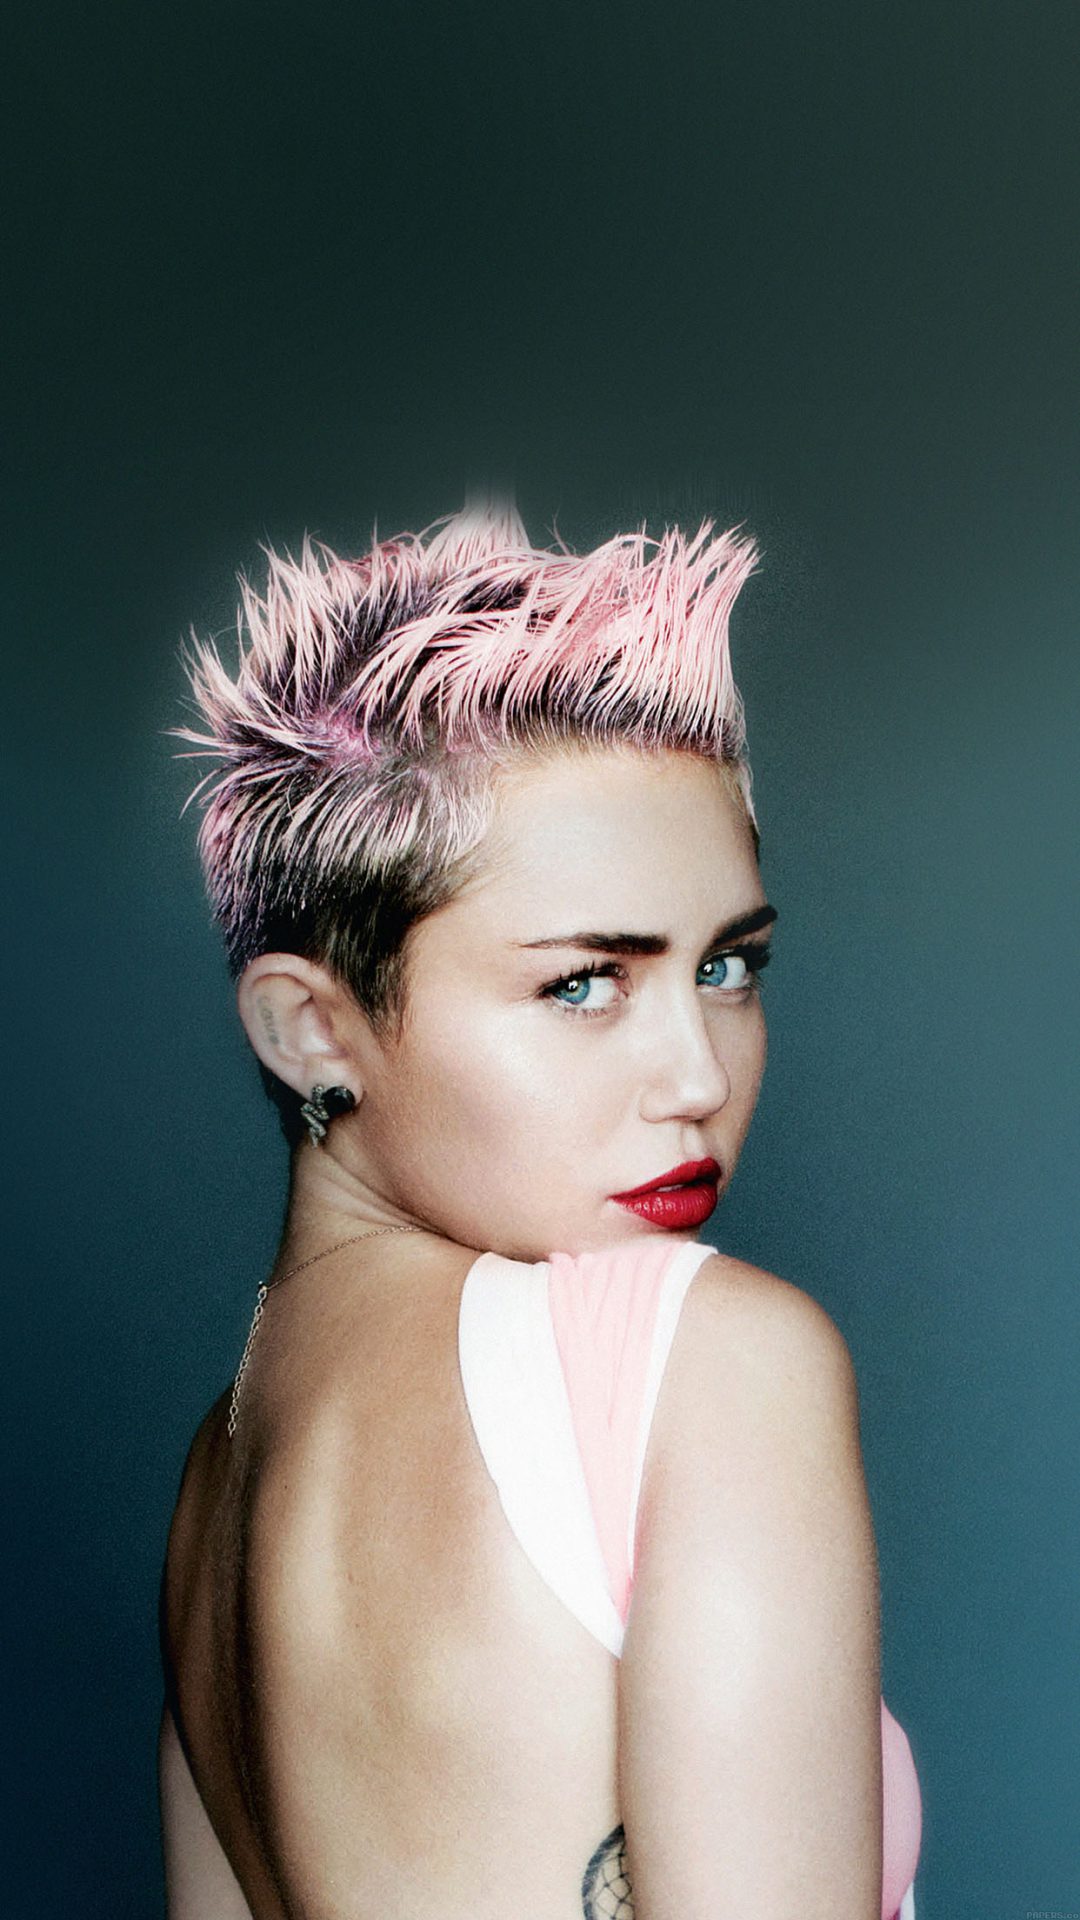 Wallpaper Miley Cyrus For V Face Music